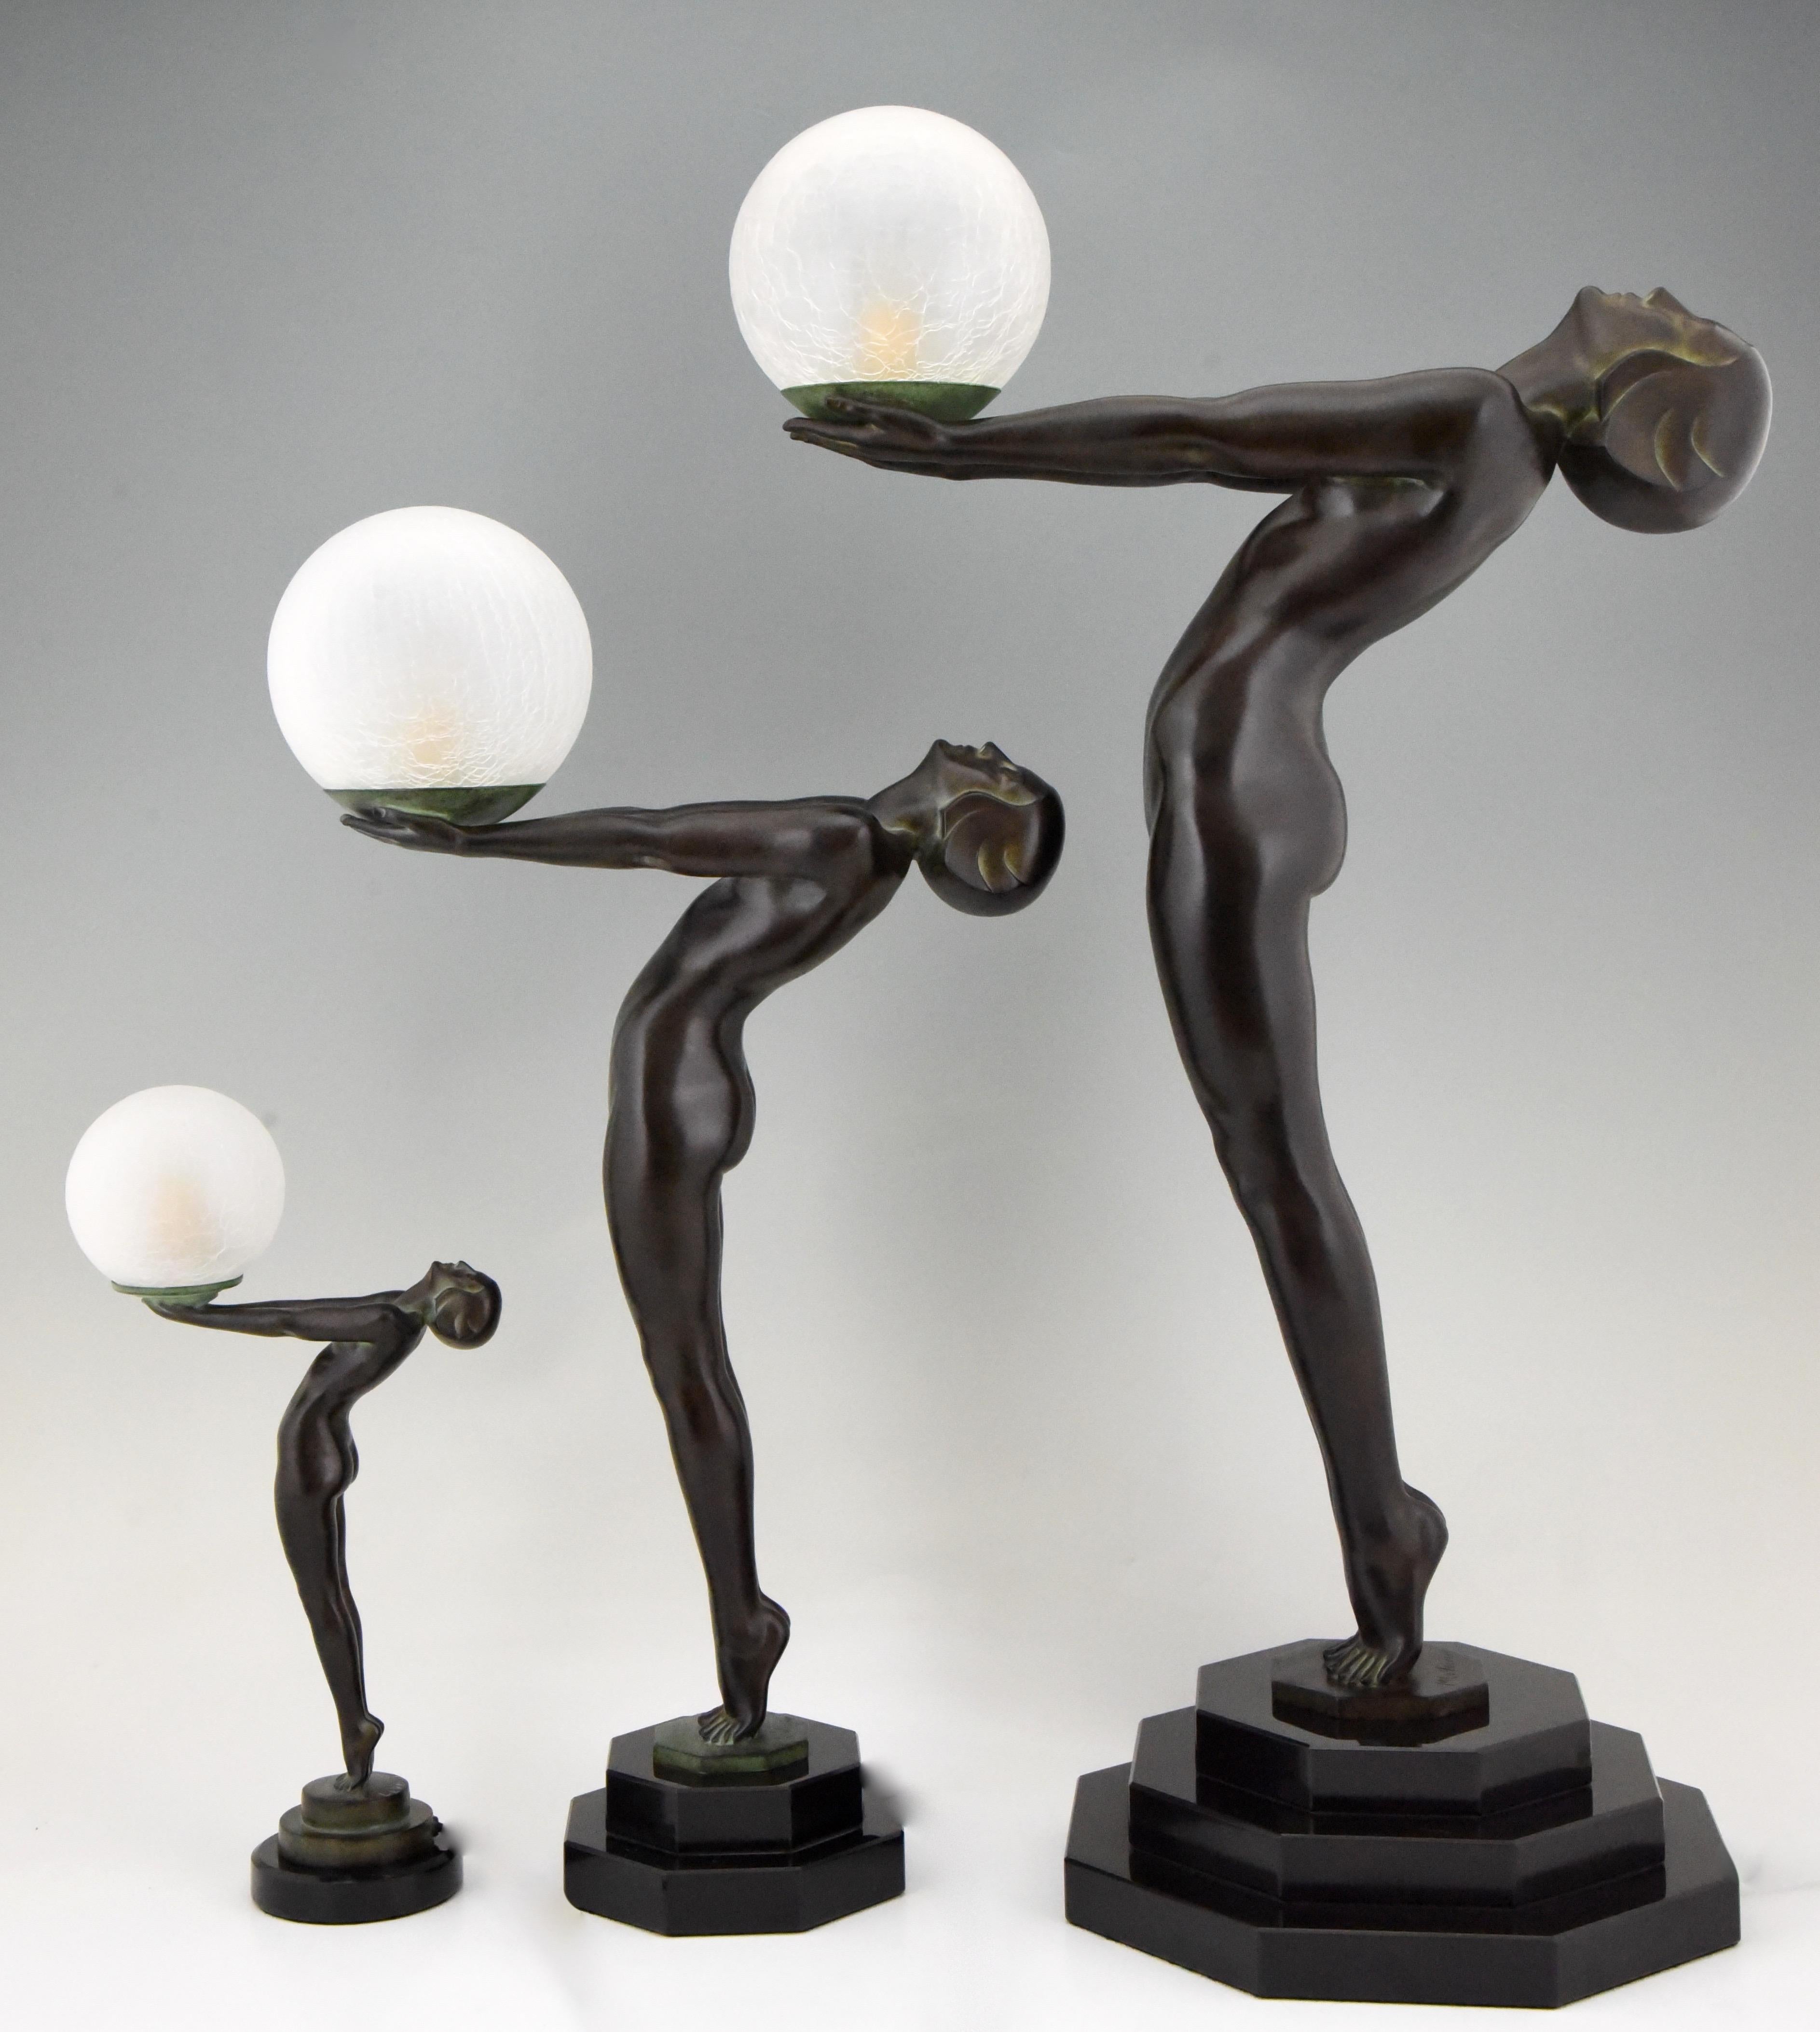 Art Deco style Lamp Clarté Nude with Globe by Max Le Verrier H. 33 inch / 84 cm For Sale 7